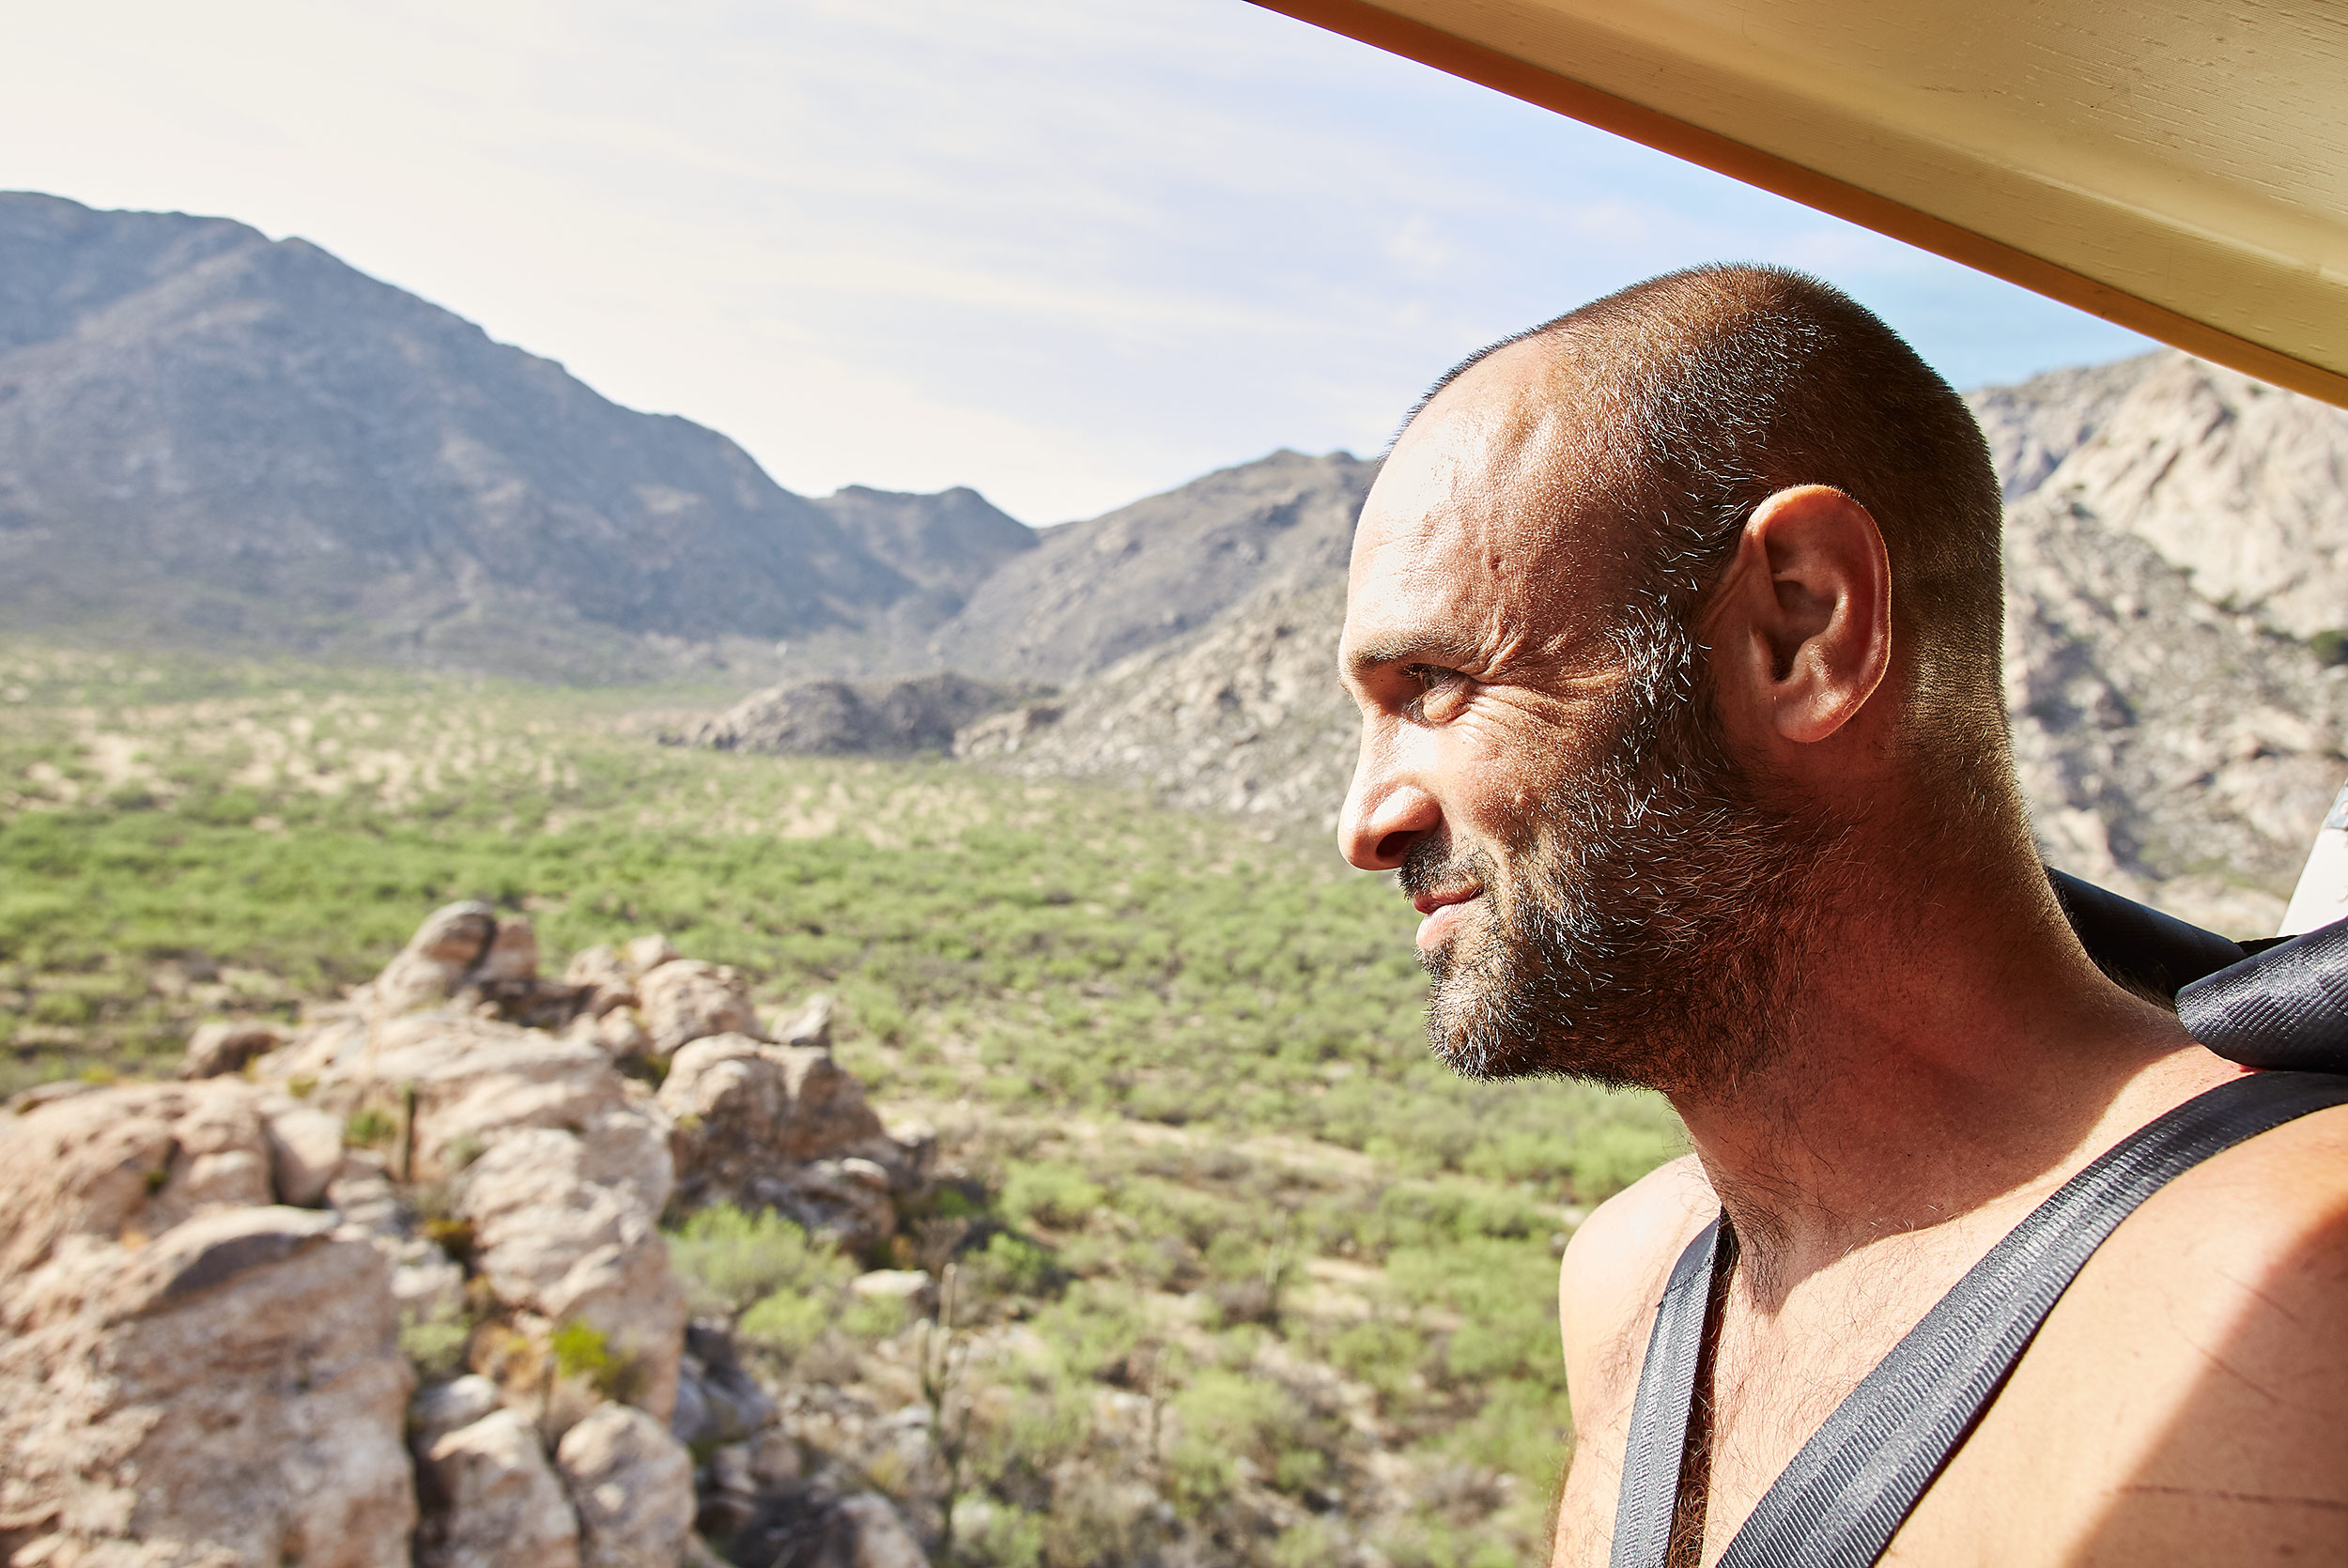 Marooned with Ed Stafford - Steve Craft Photography, Phoenix, Arizona based Commercial, Aviation & Editorial Photographer